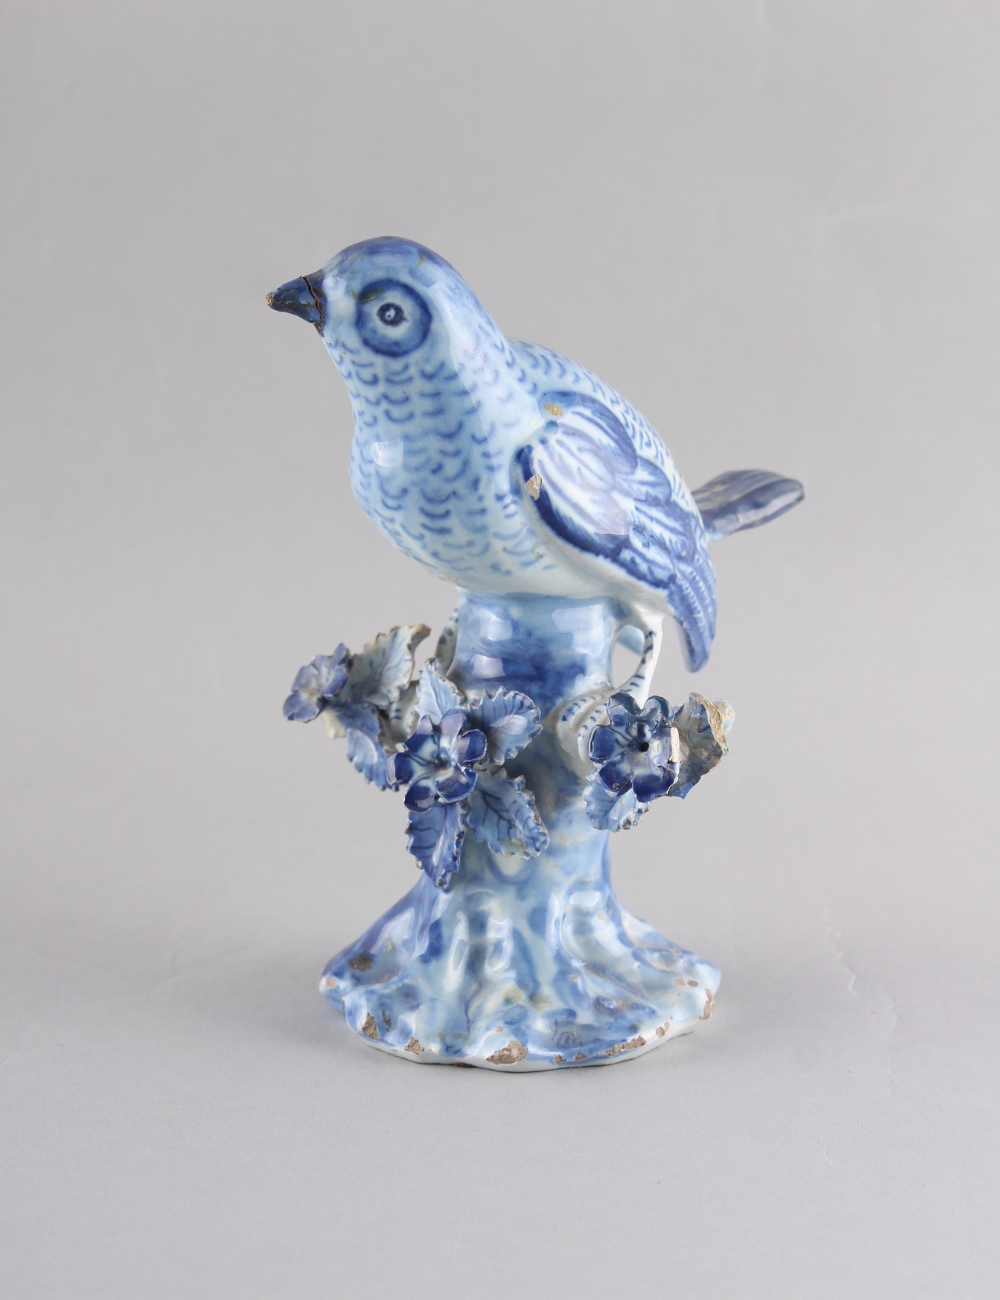 Property of a deceased estate - a late 18th century Dutch Delft blue & white model of a bird perched - Image 2 of 3